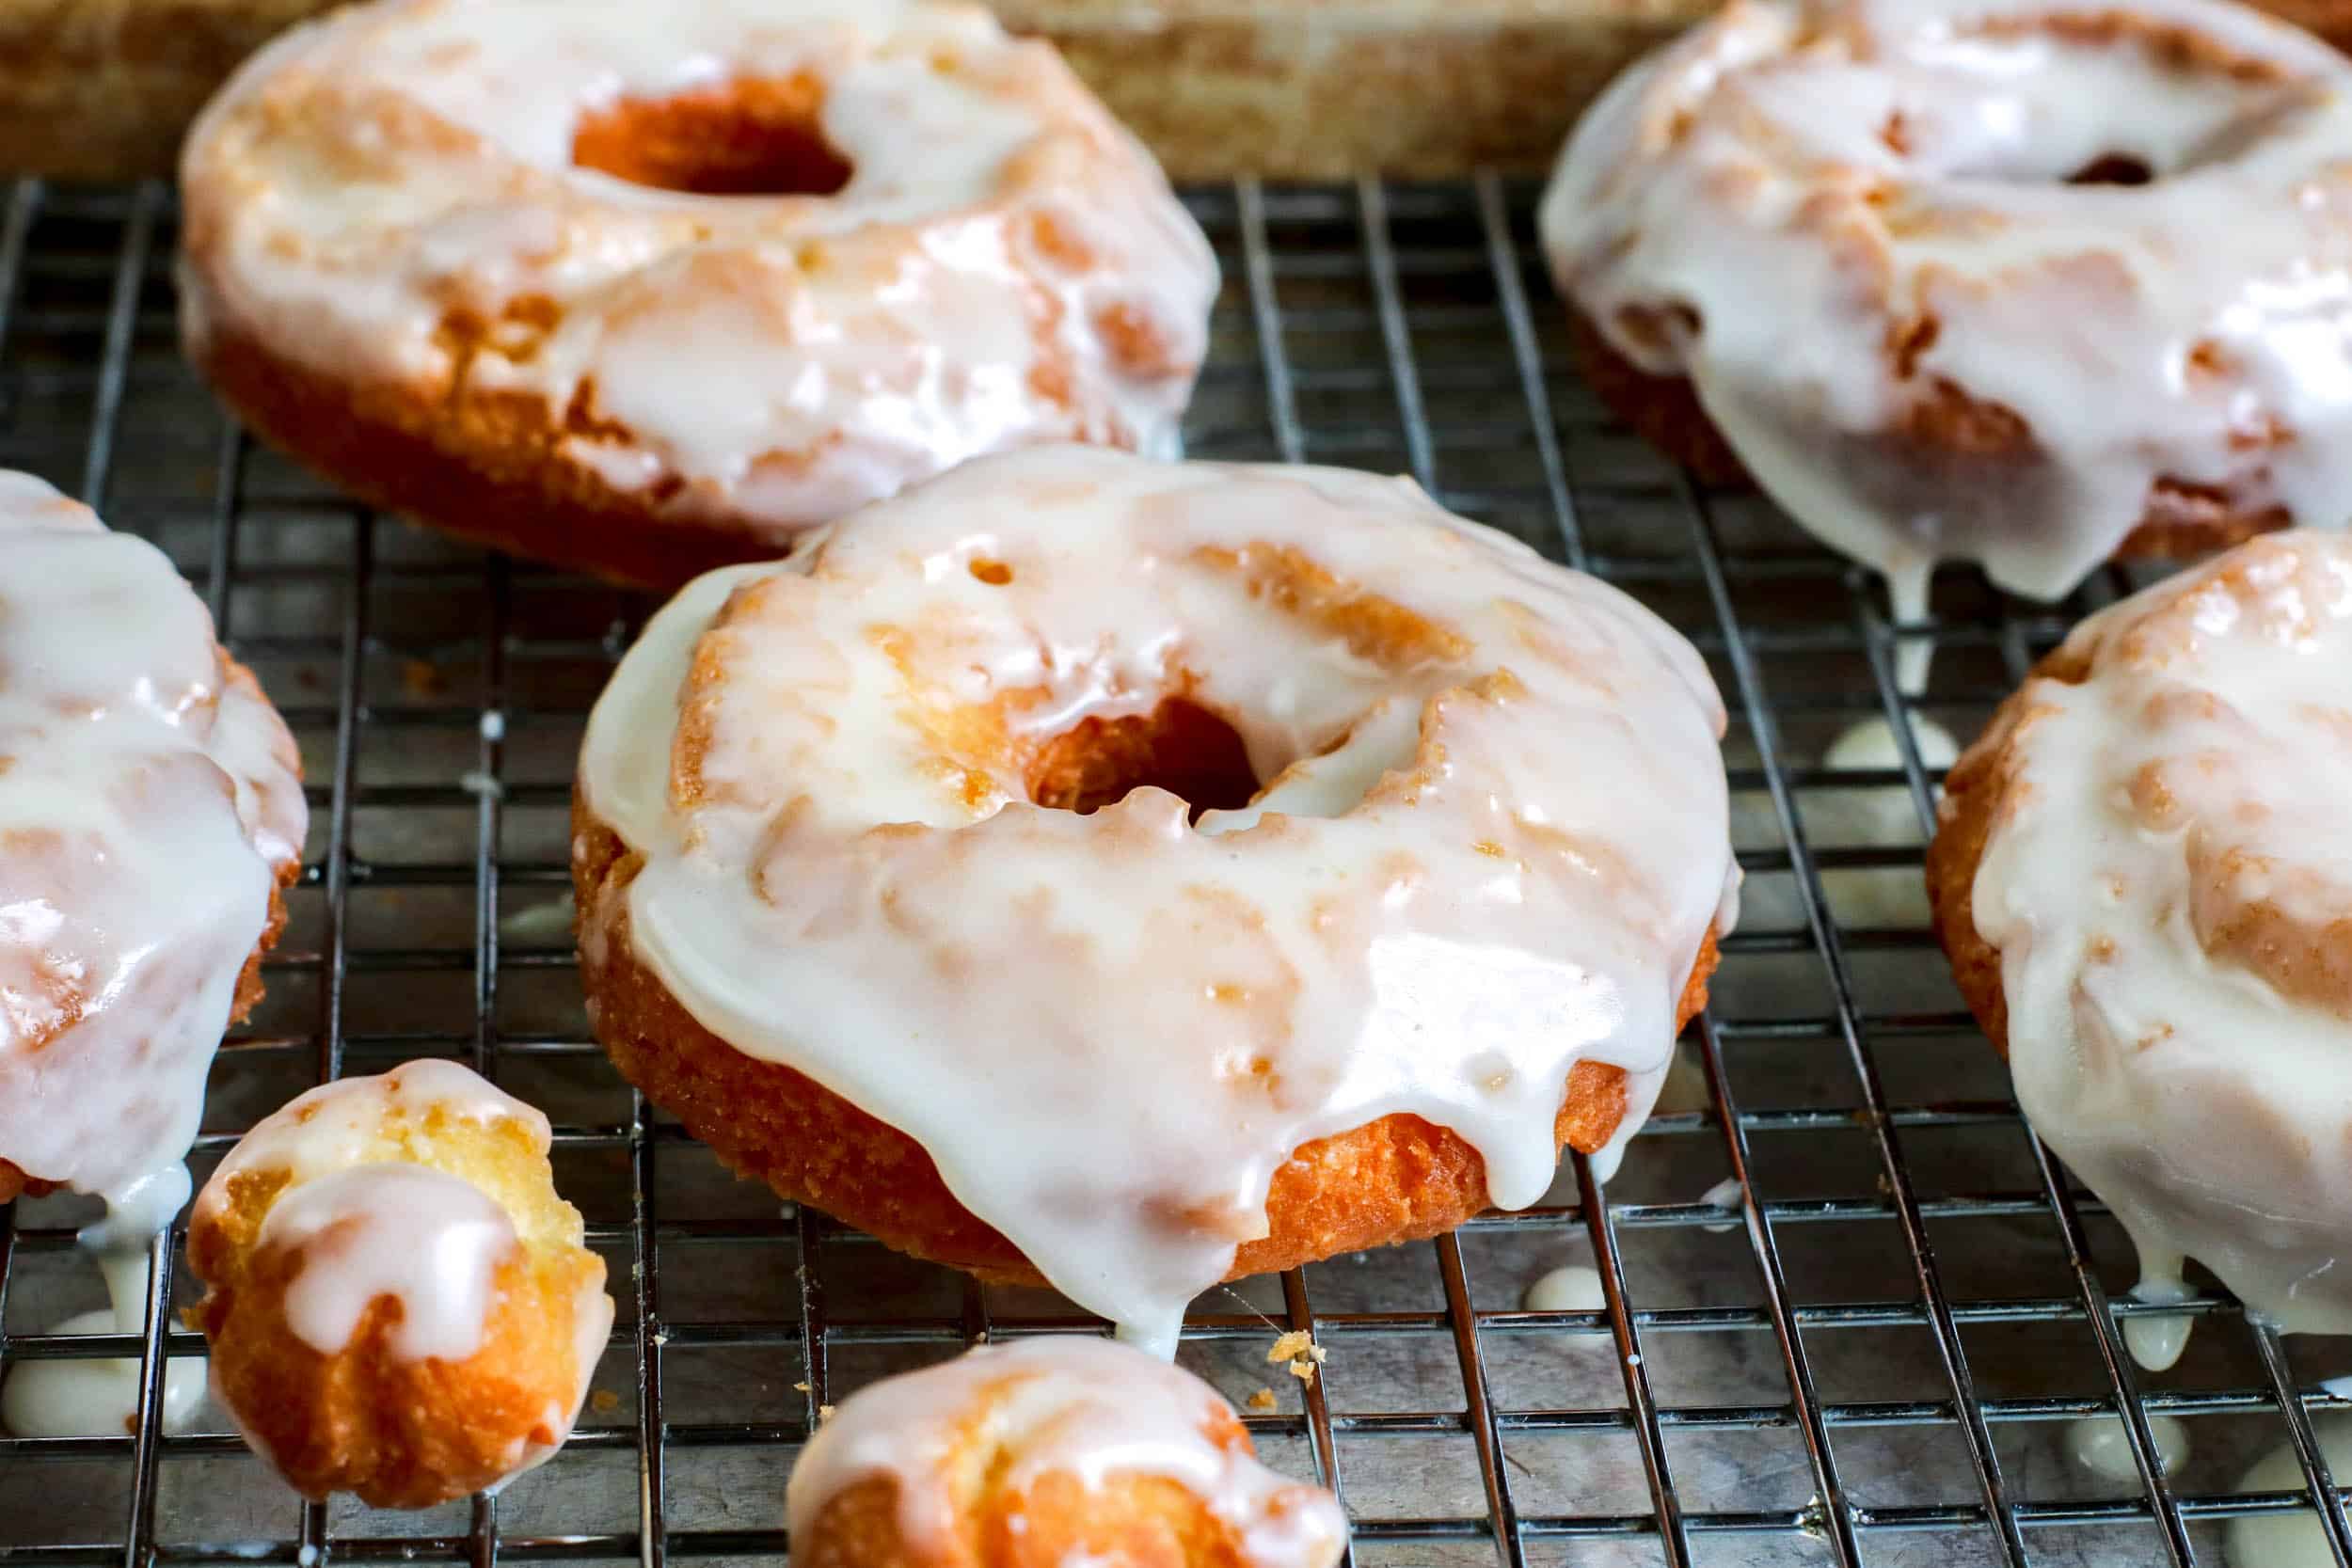 Glazed sour cream donuts on a cooling rack